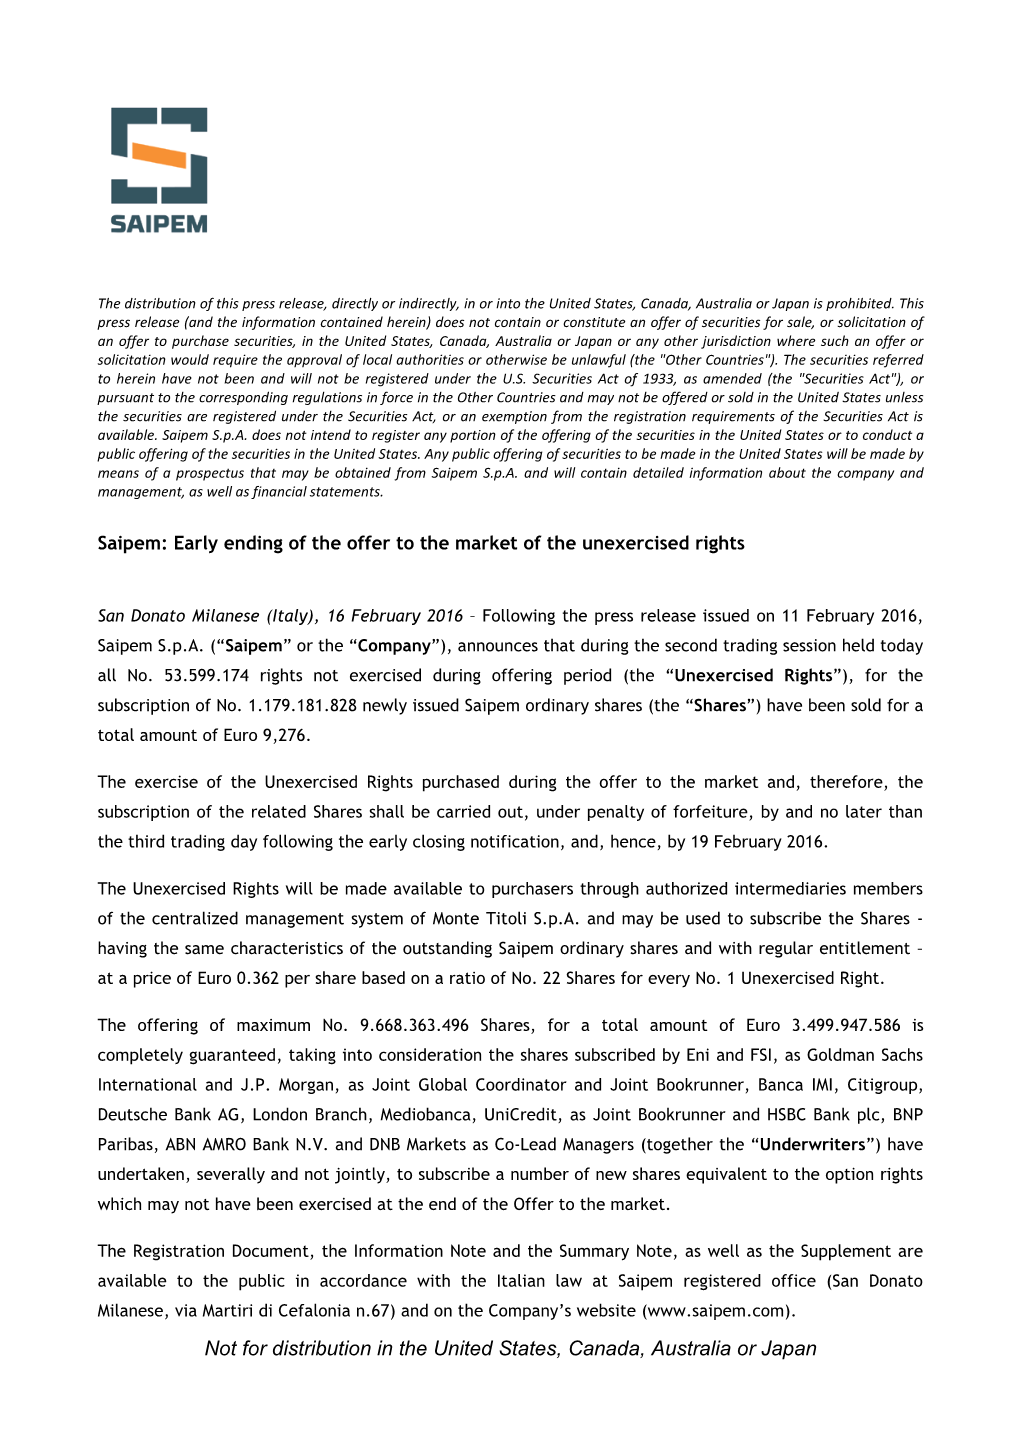 Saipem: Early Ending of the Offer to the Market of the Unexercised Rights